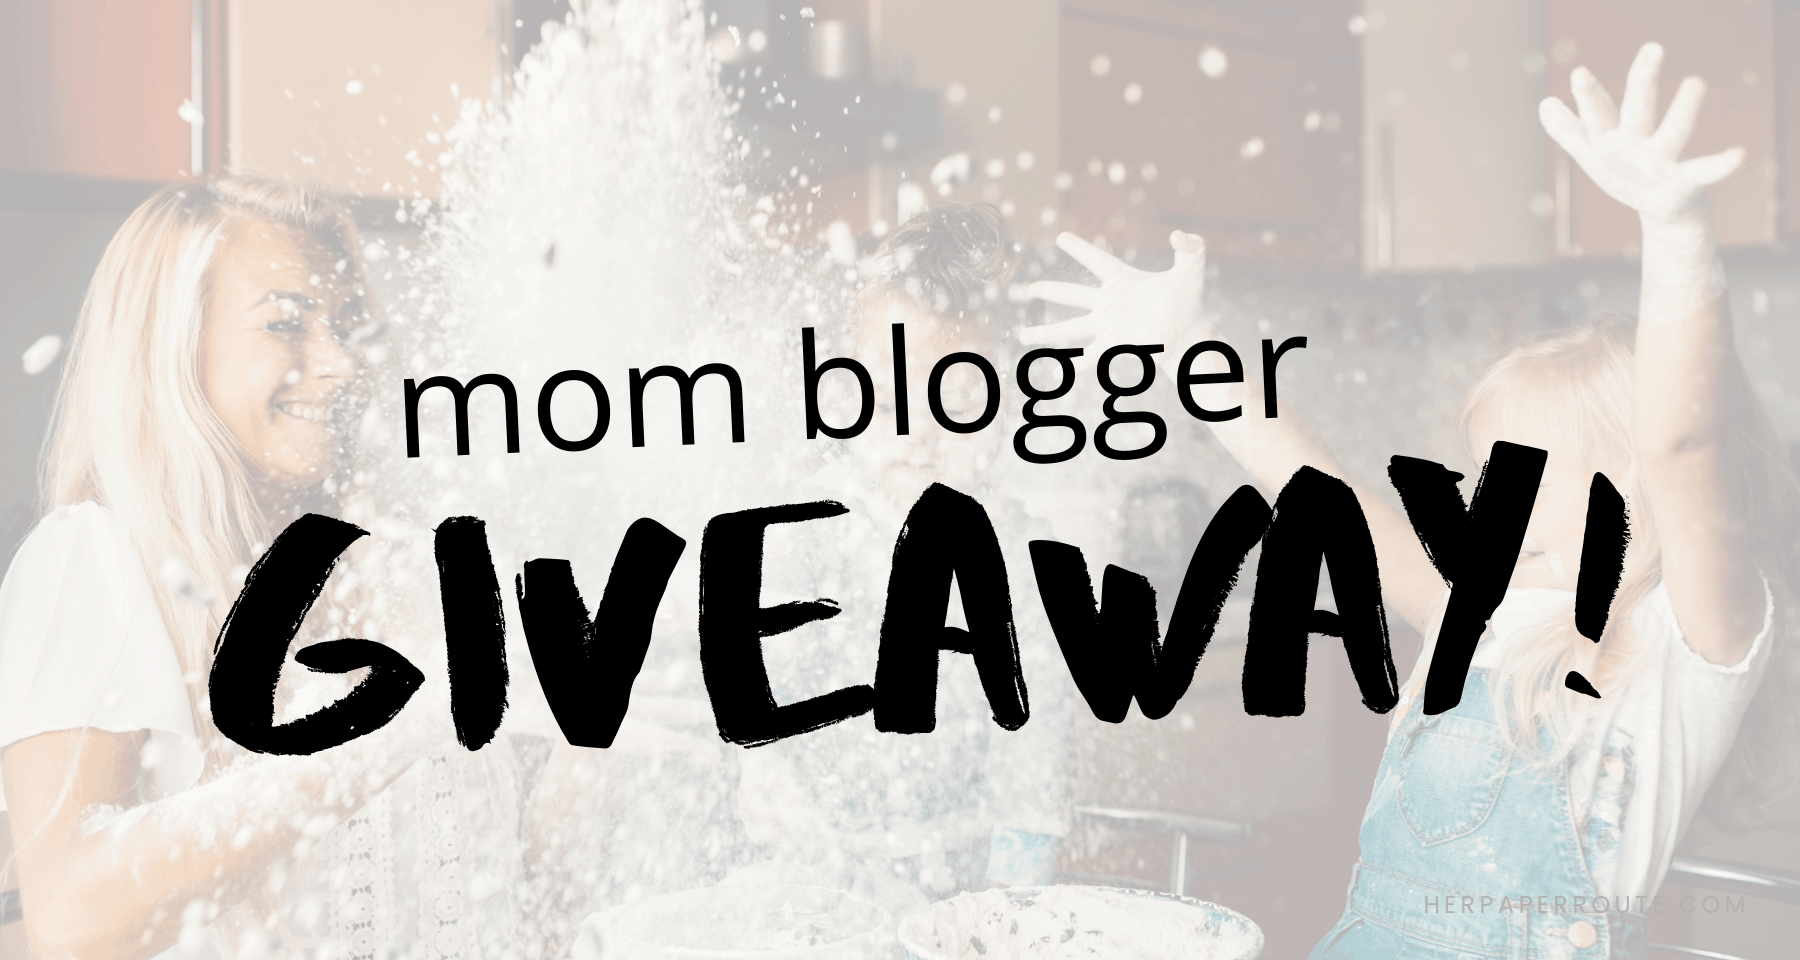 mom blogger giveaway 2019 how to win the ultimate blogging tools